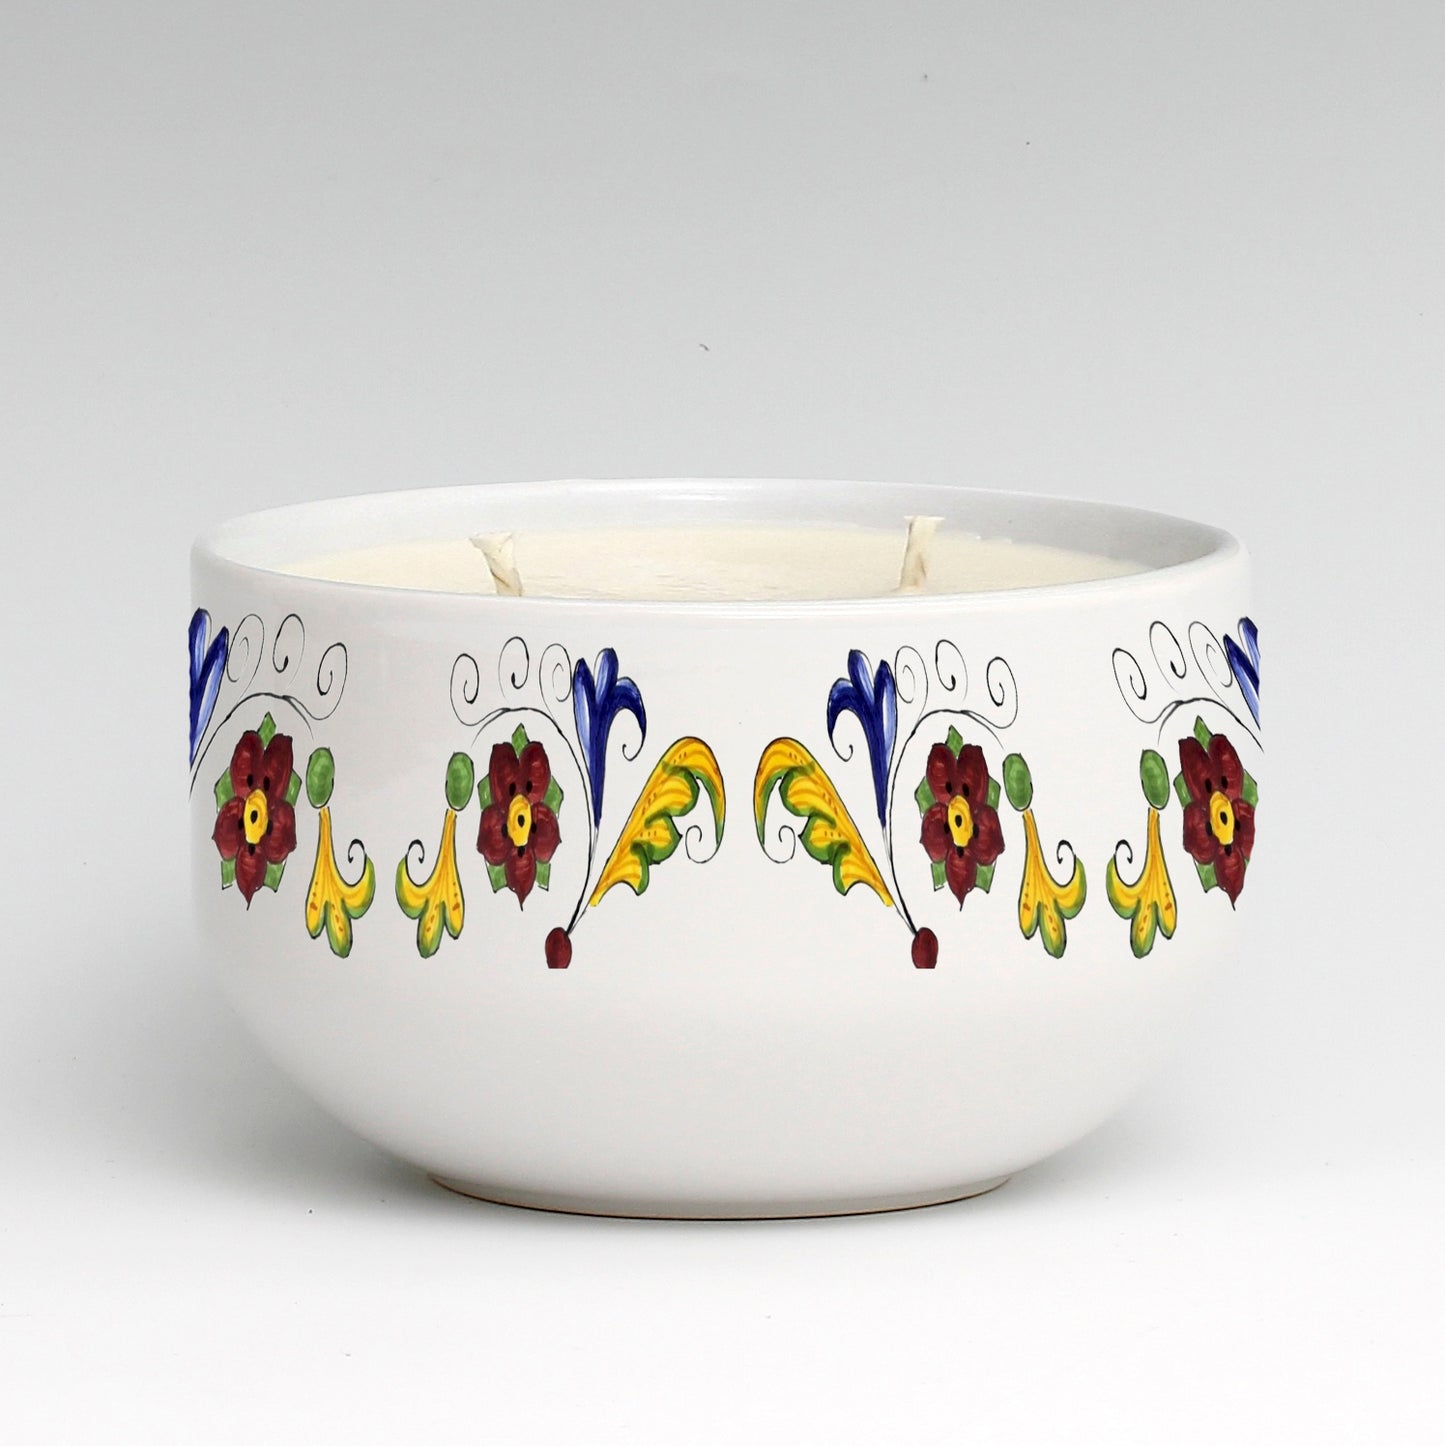 SUBLIMART: Two Wicks Soy Wax Candle in a Porcelain Bowl - Deruta Style (Design #DER03)